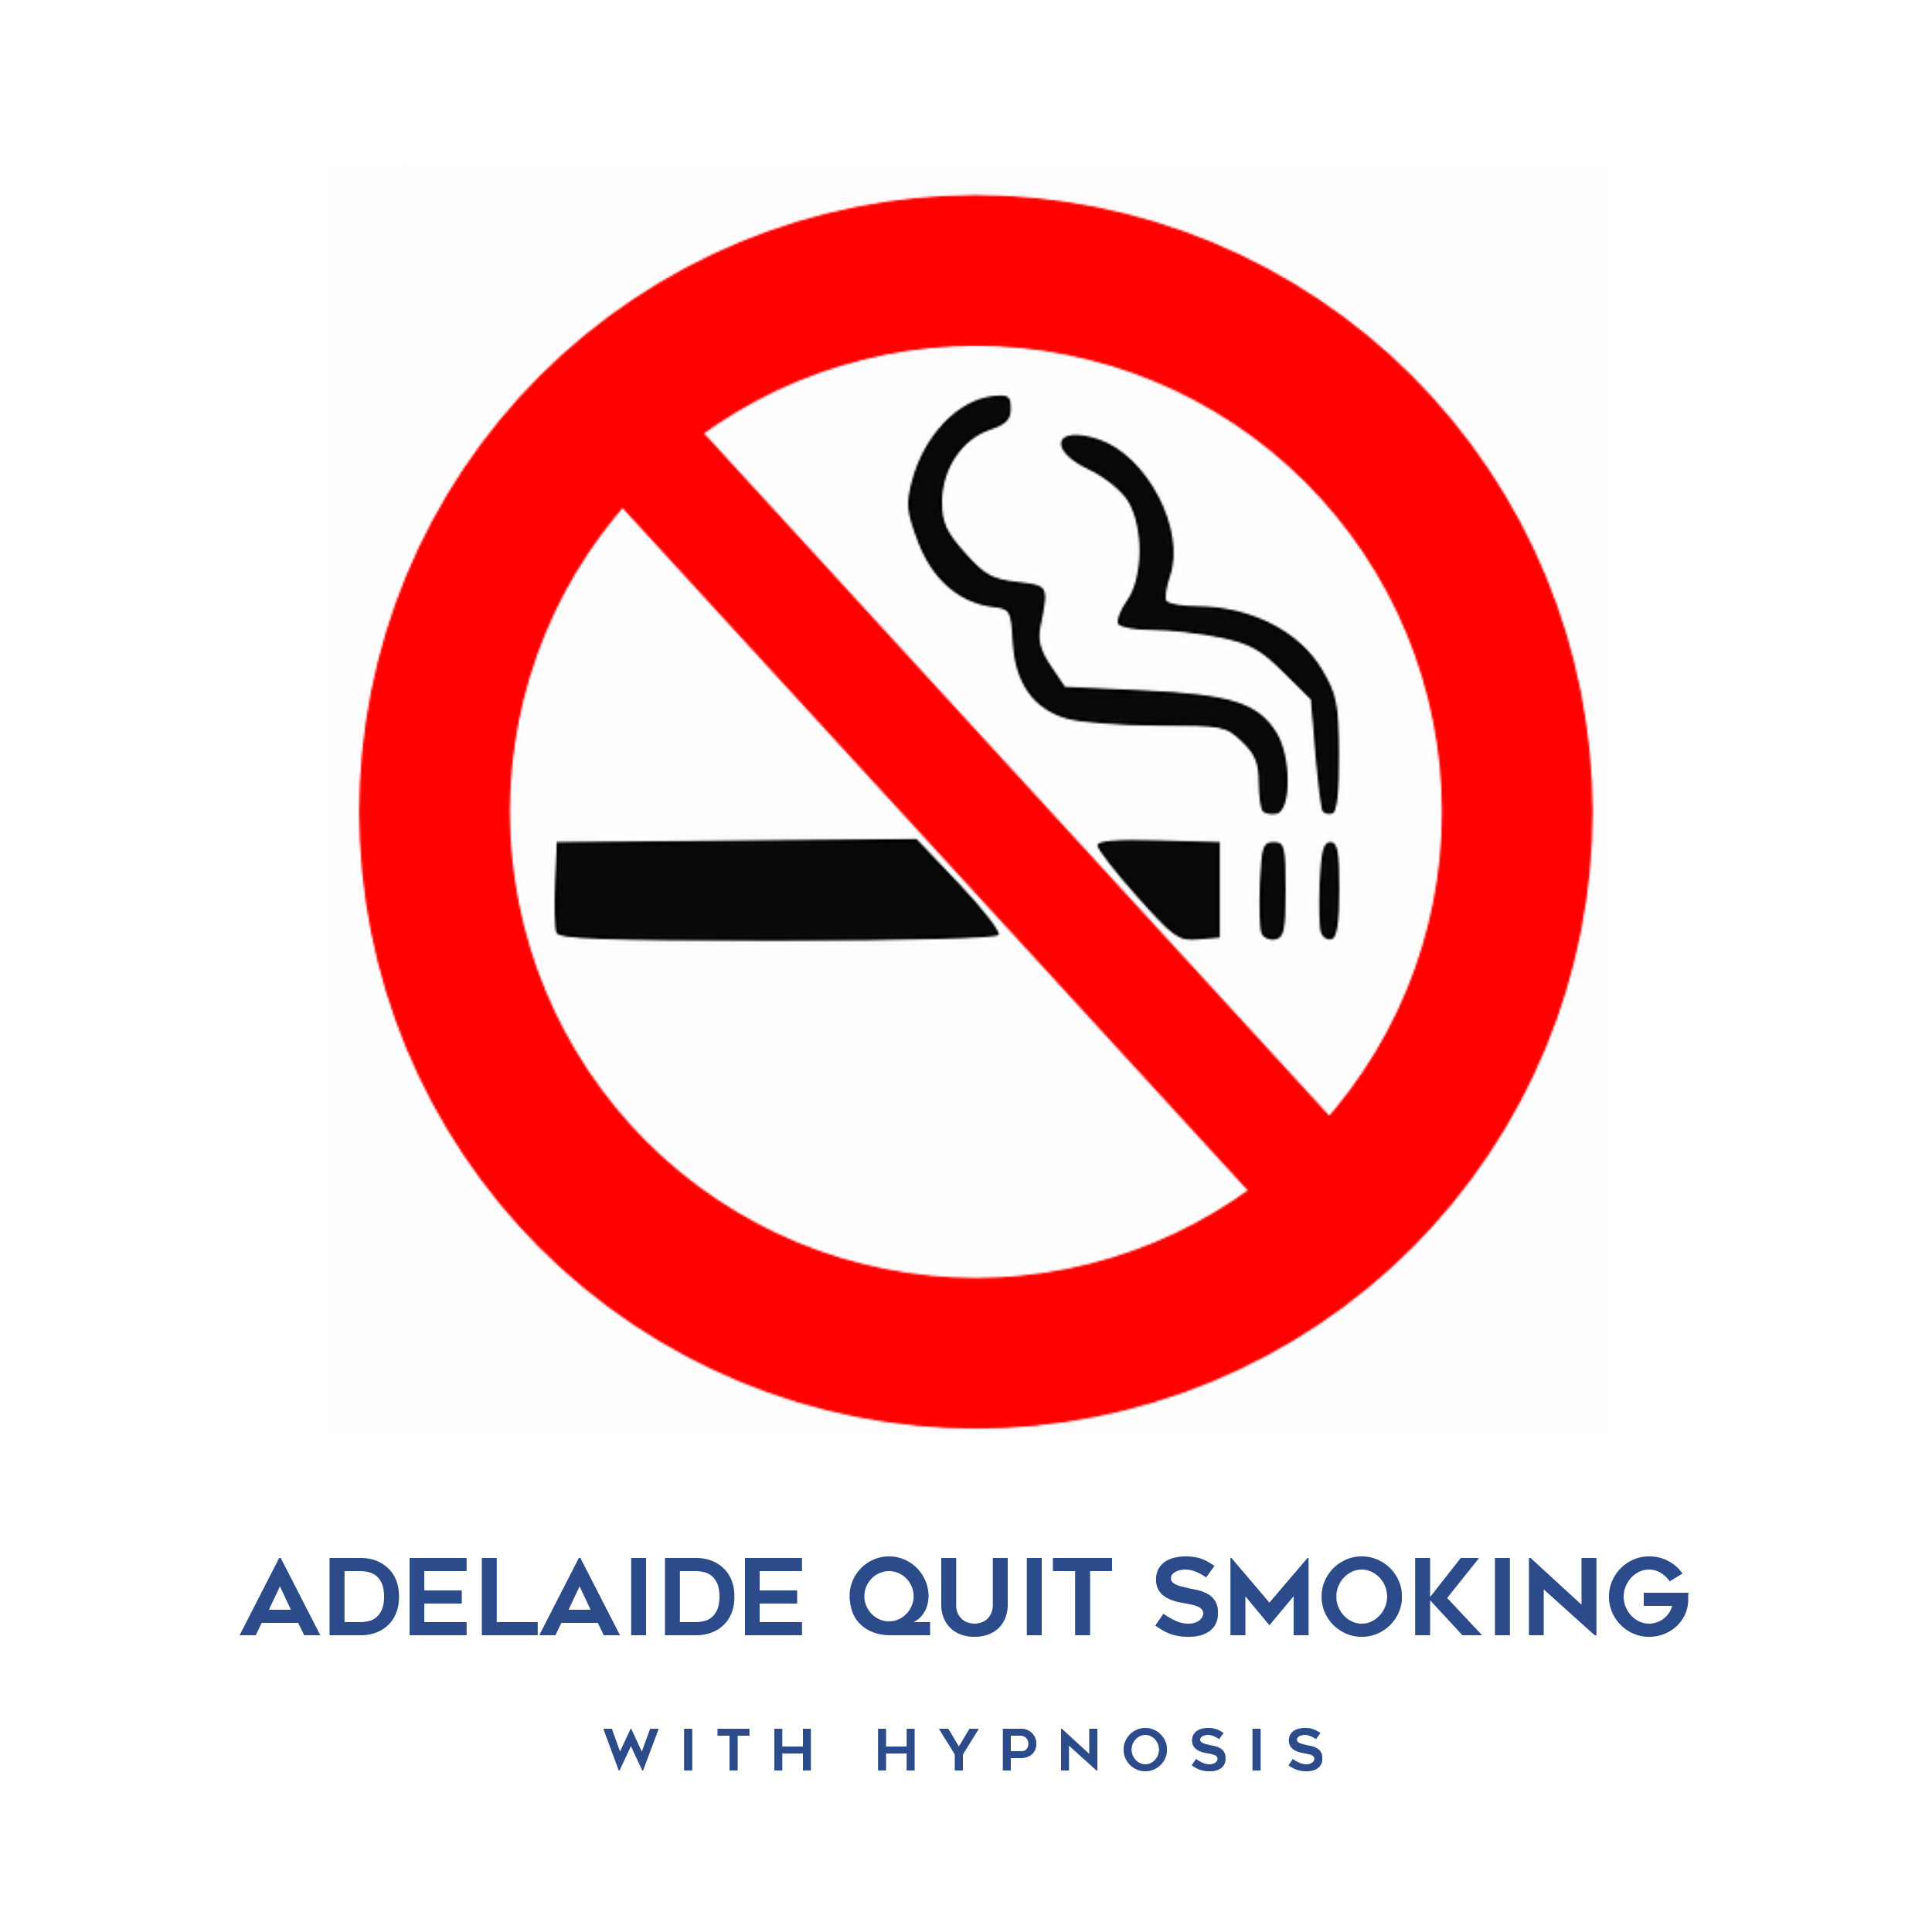 Adelaide Quit Smoking with Hypnosis works with 90 minute session